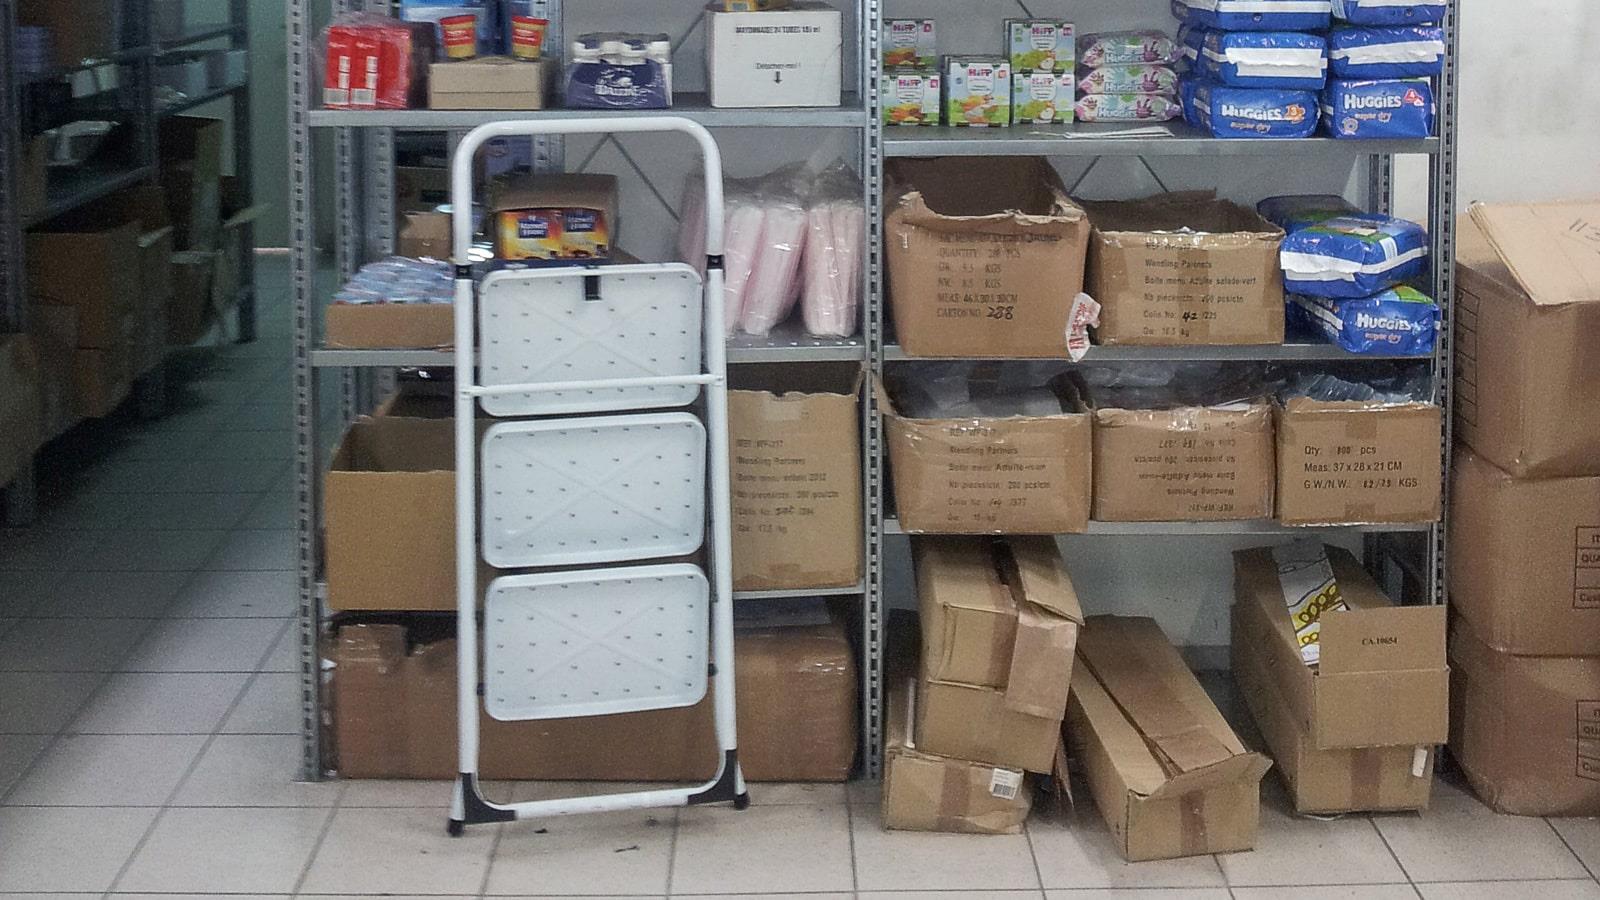 Ladder placed in front of rack with full cardboard boxes